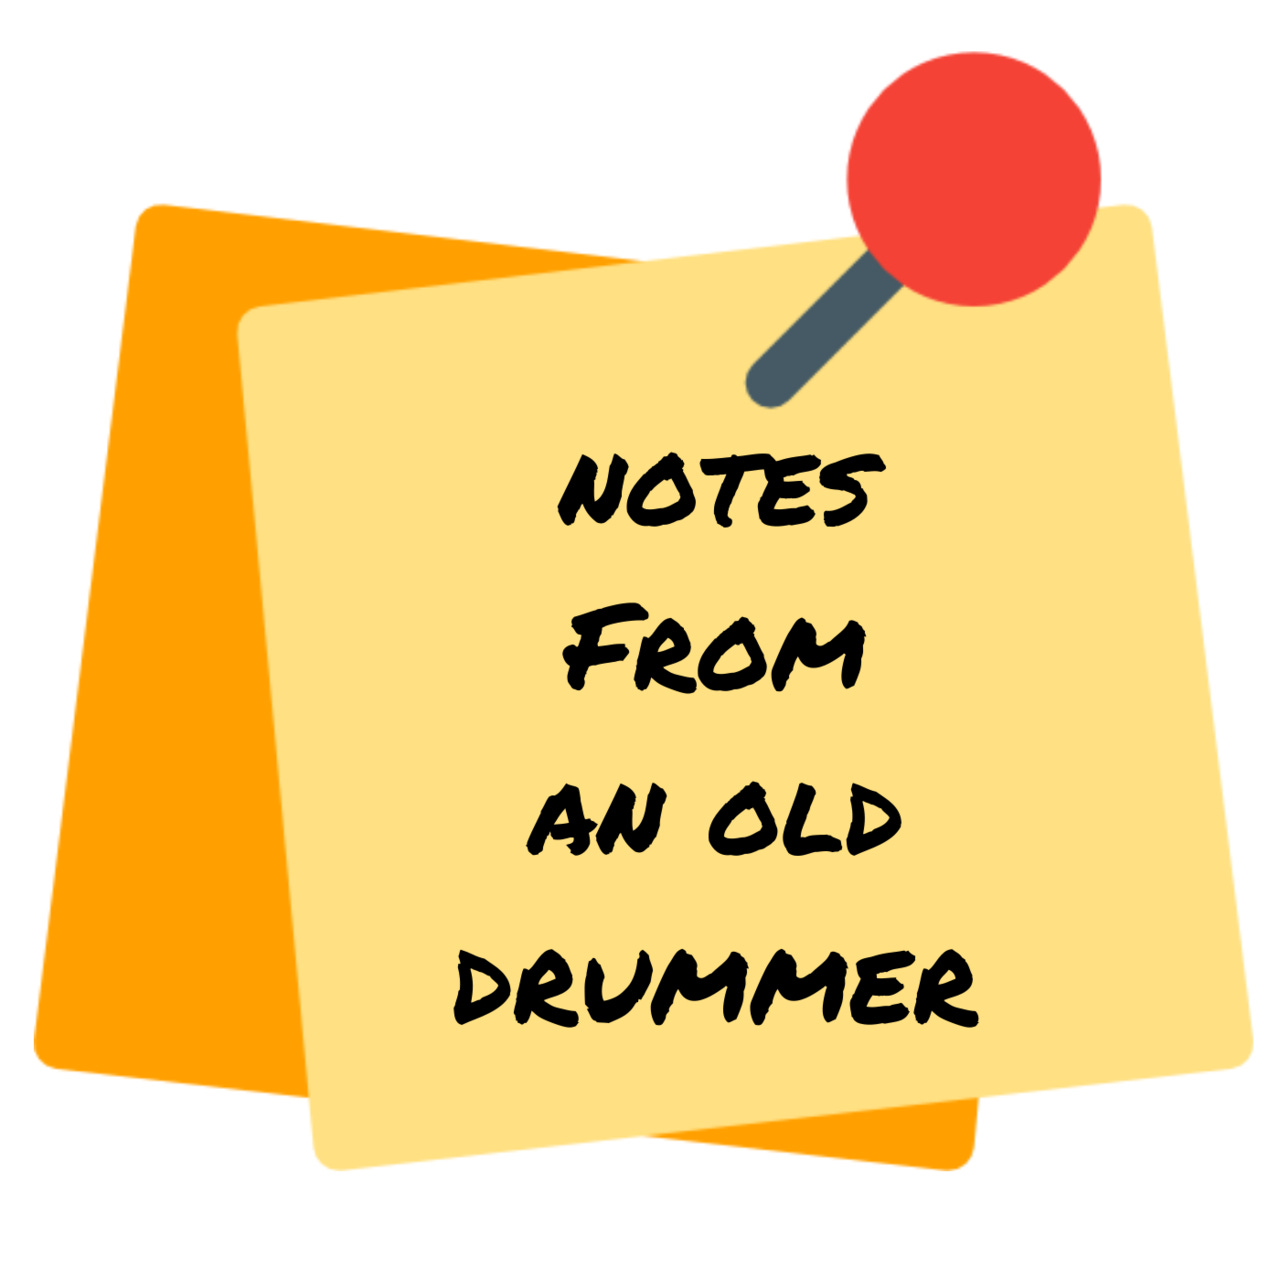 Artwork for Notes from an ‘OLD’ Drummer